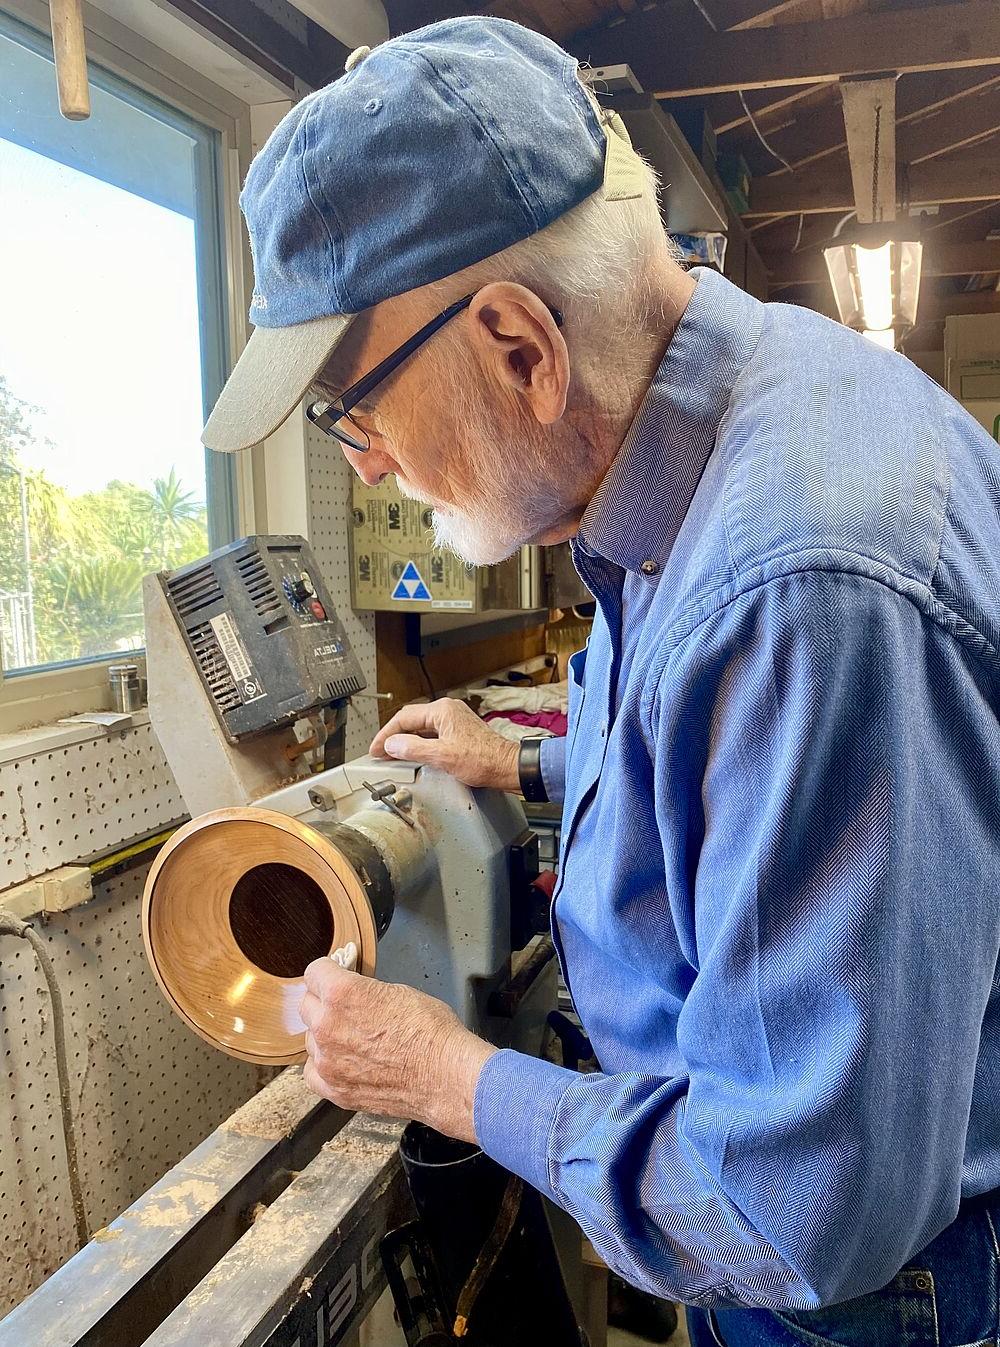 Gerald carves a wooden bowl on a lathe.